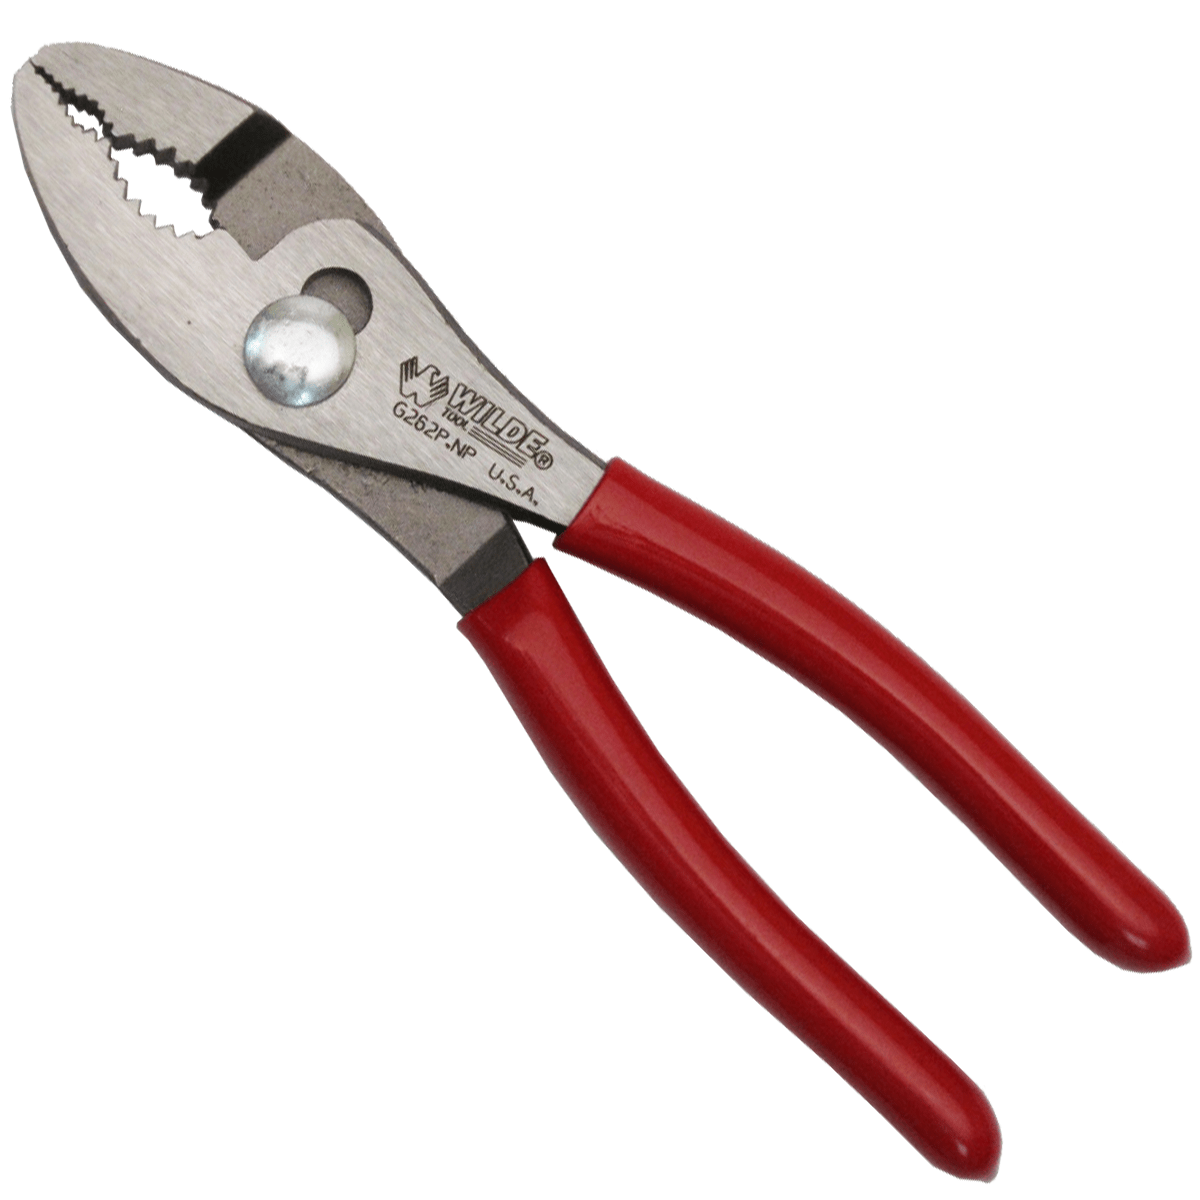 Wilde USA 6 1/2" Slip Joint Pliers, G262P